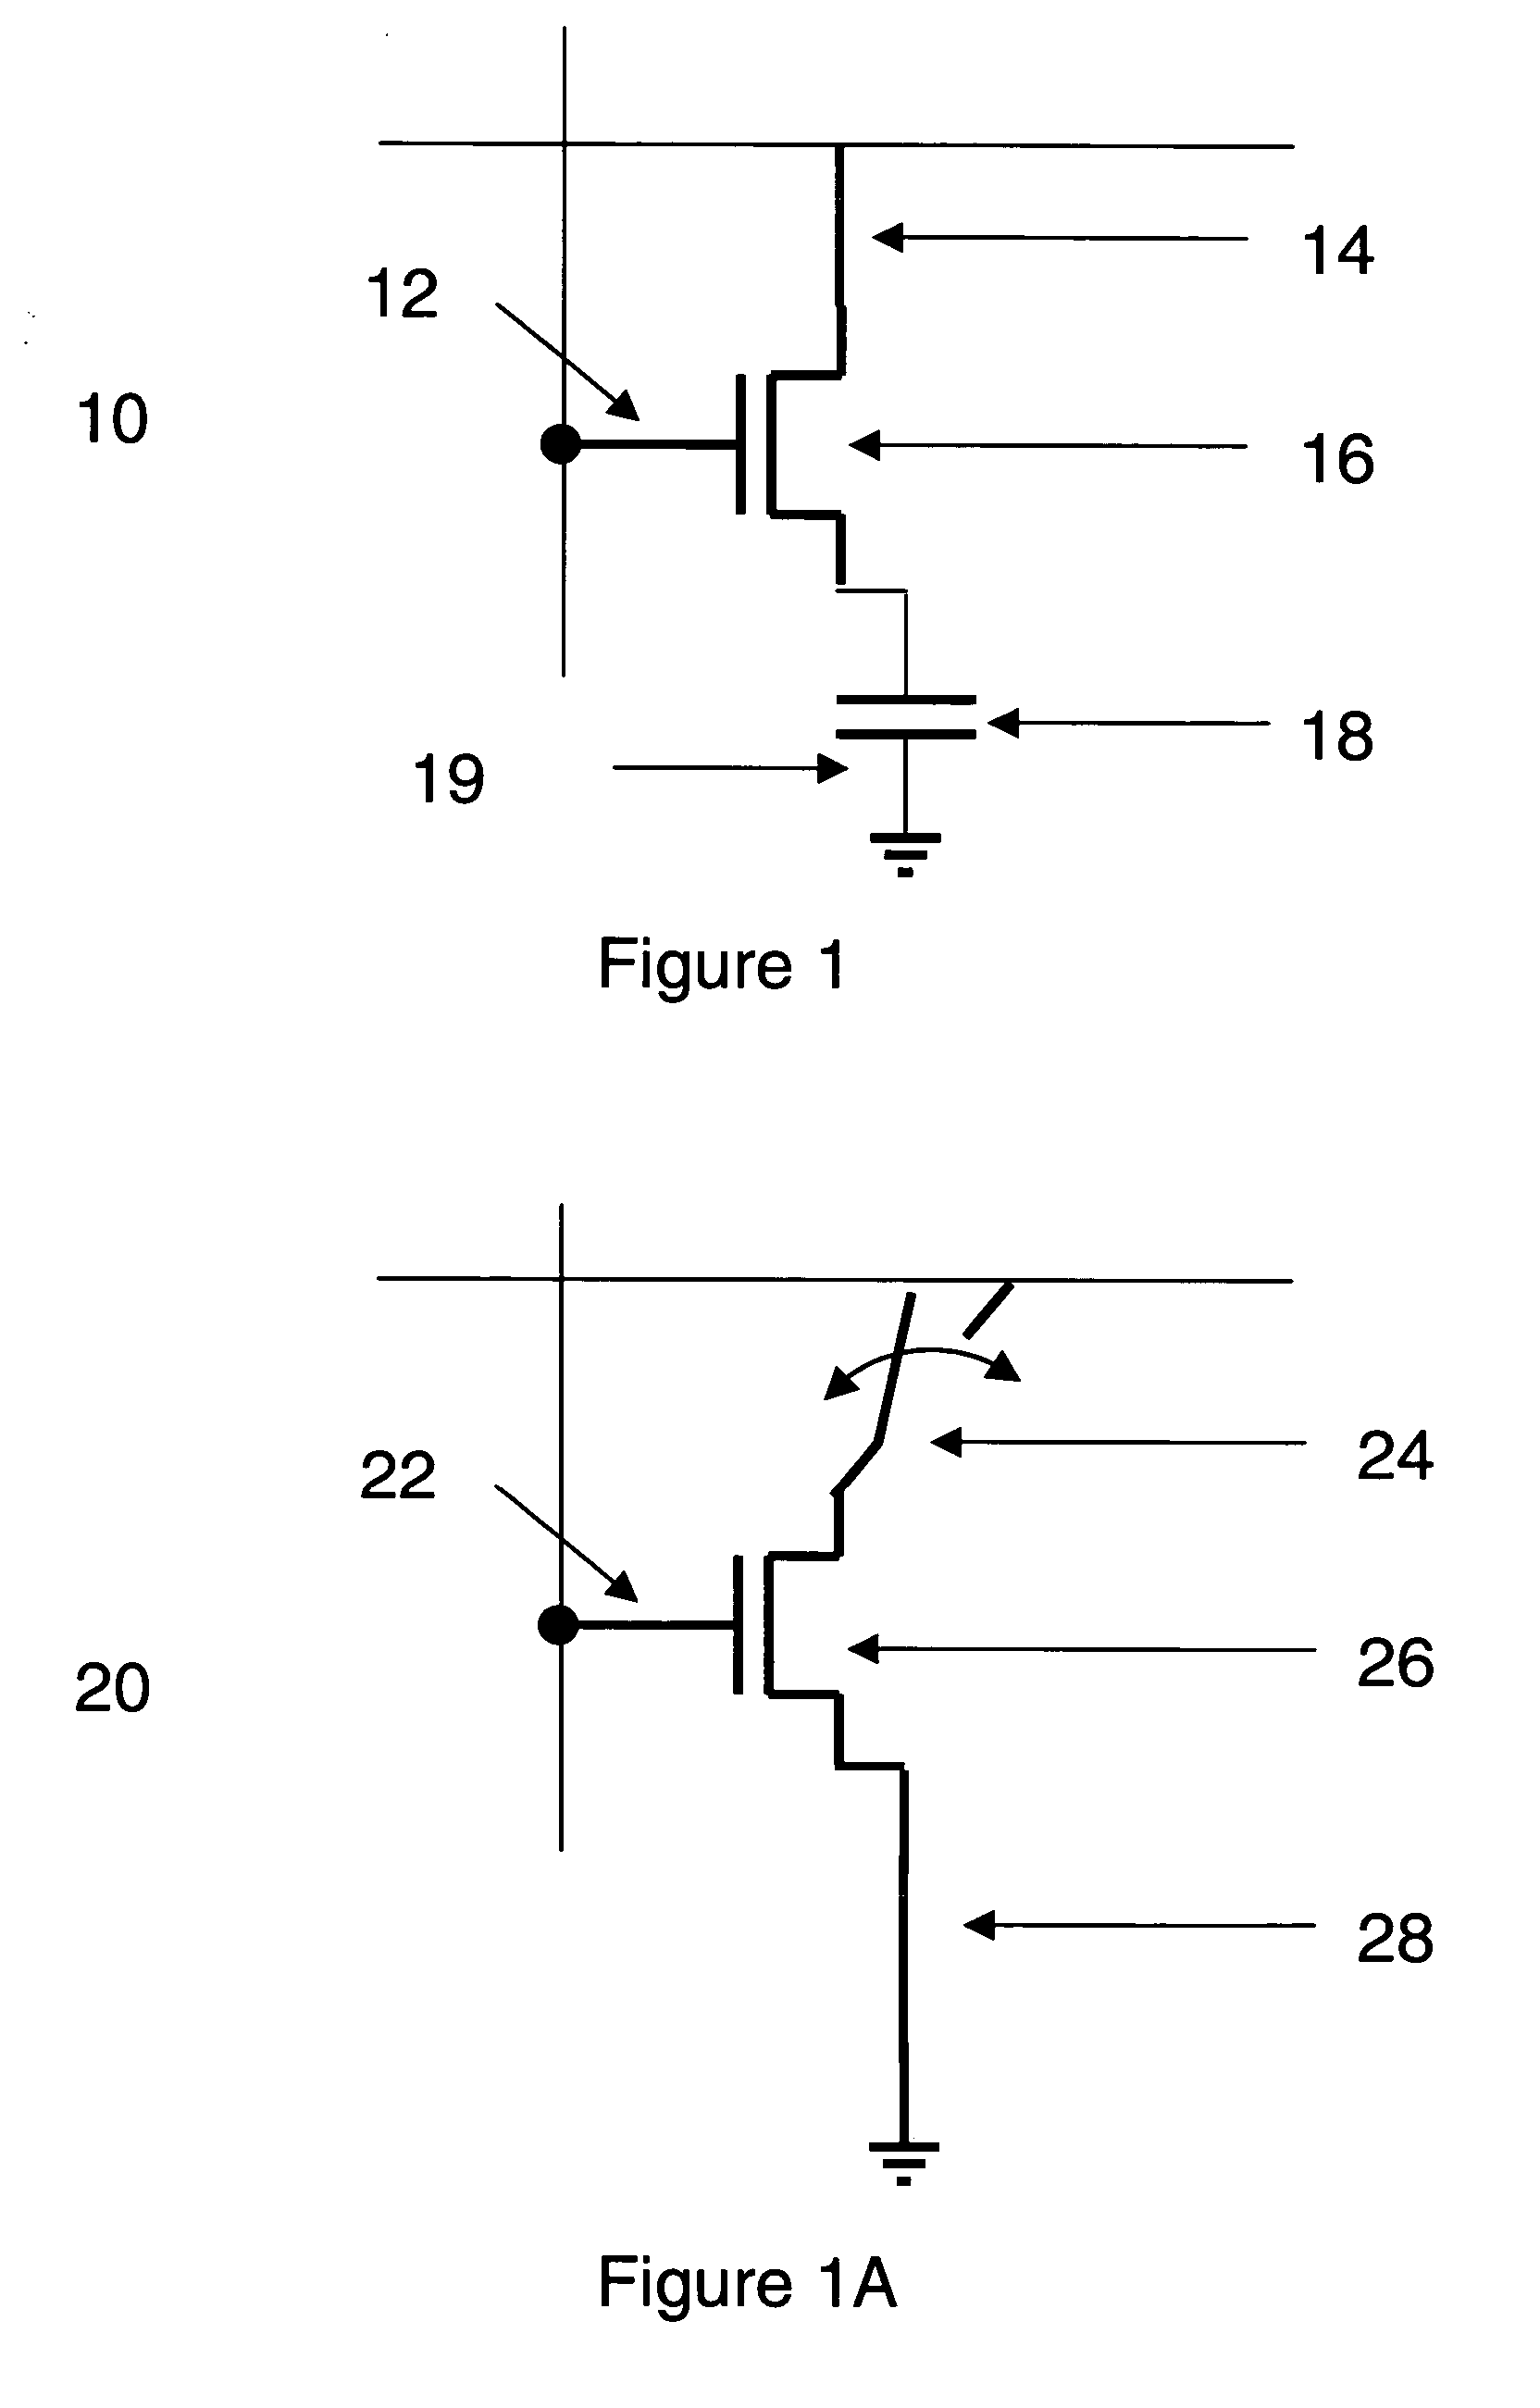 One-time programmable, non-volatile field effect devices and methods of making same